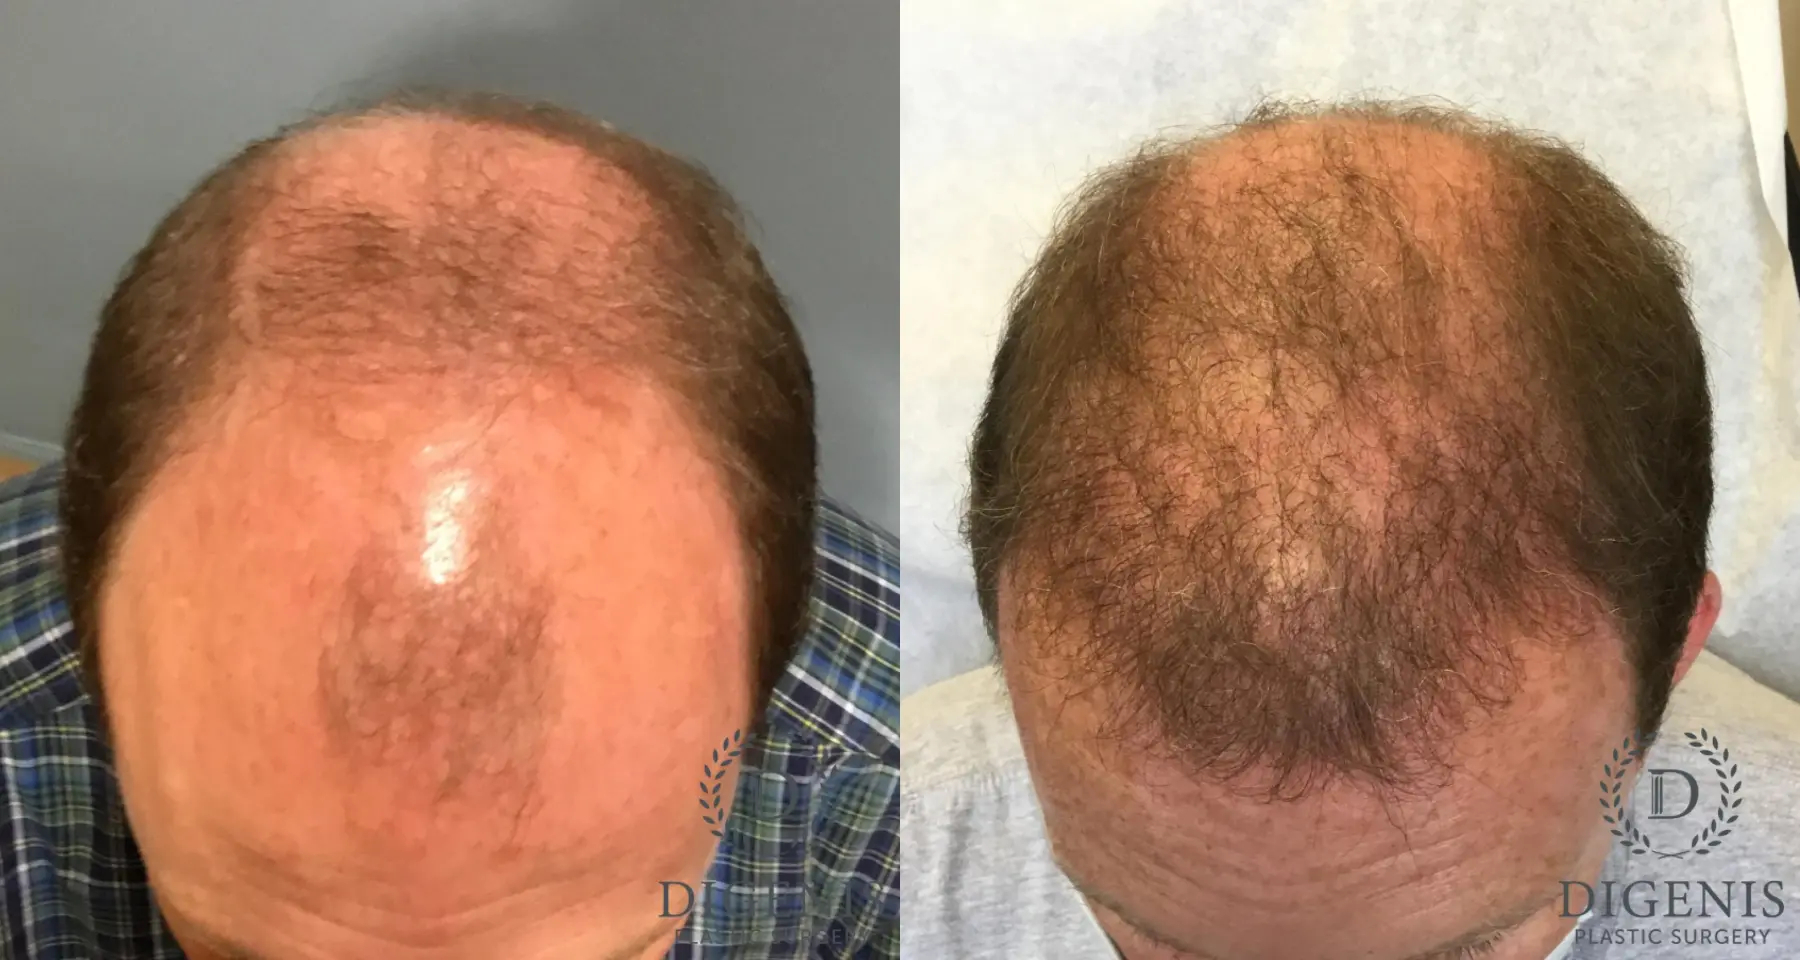 NeoGraft Hair Restoration: Patient 4 - Before and After 1